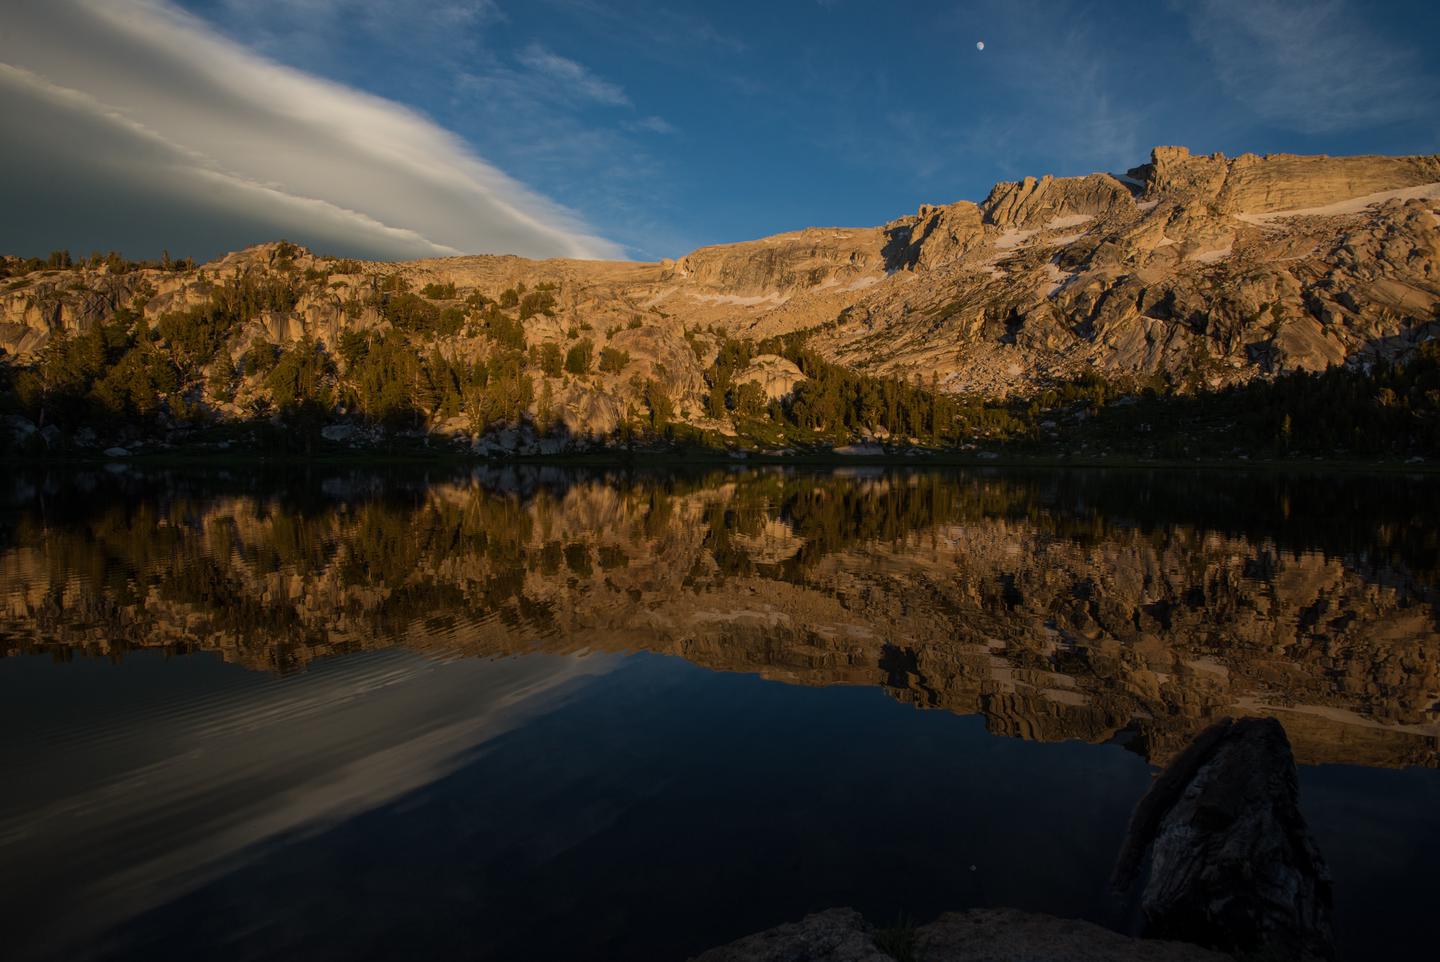 View of lake at sunset, with a mountain behind in alpenglow and the nearly full moon in the sky above.Alpenglow meets the moon, illuminating peaks surrounding a High Sierra lake. 